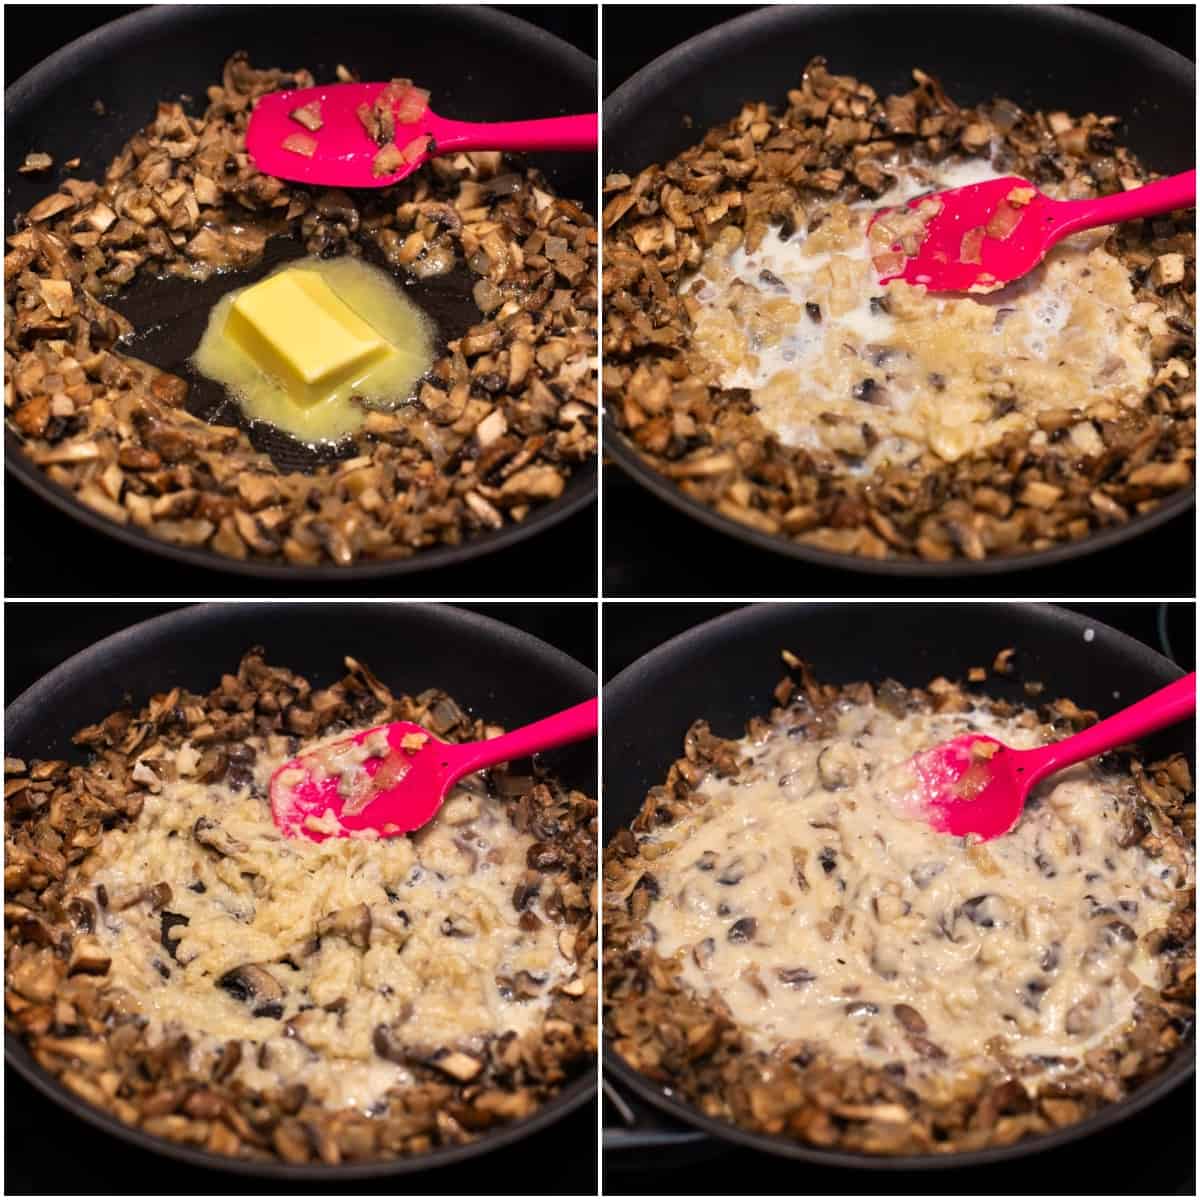 Collage showing a white sauce being made with garlic mushrooms.